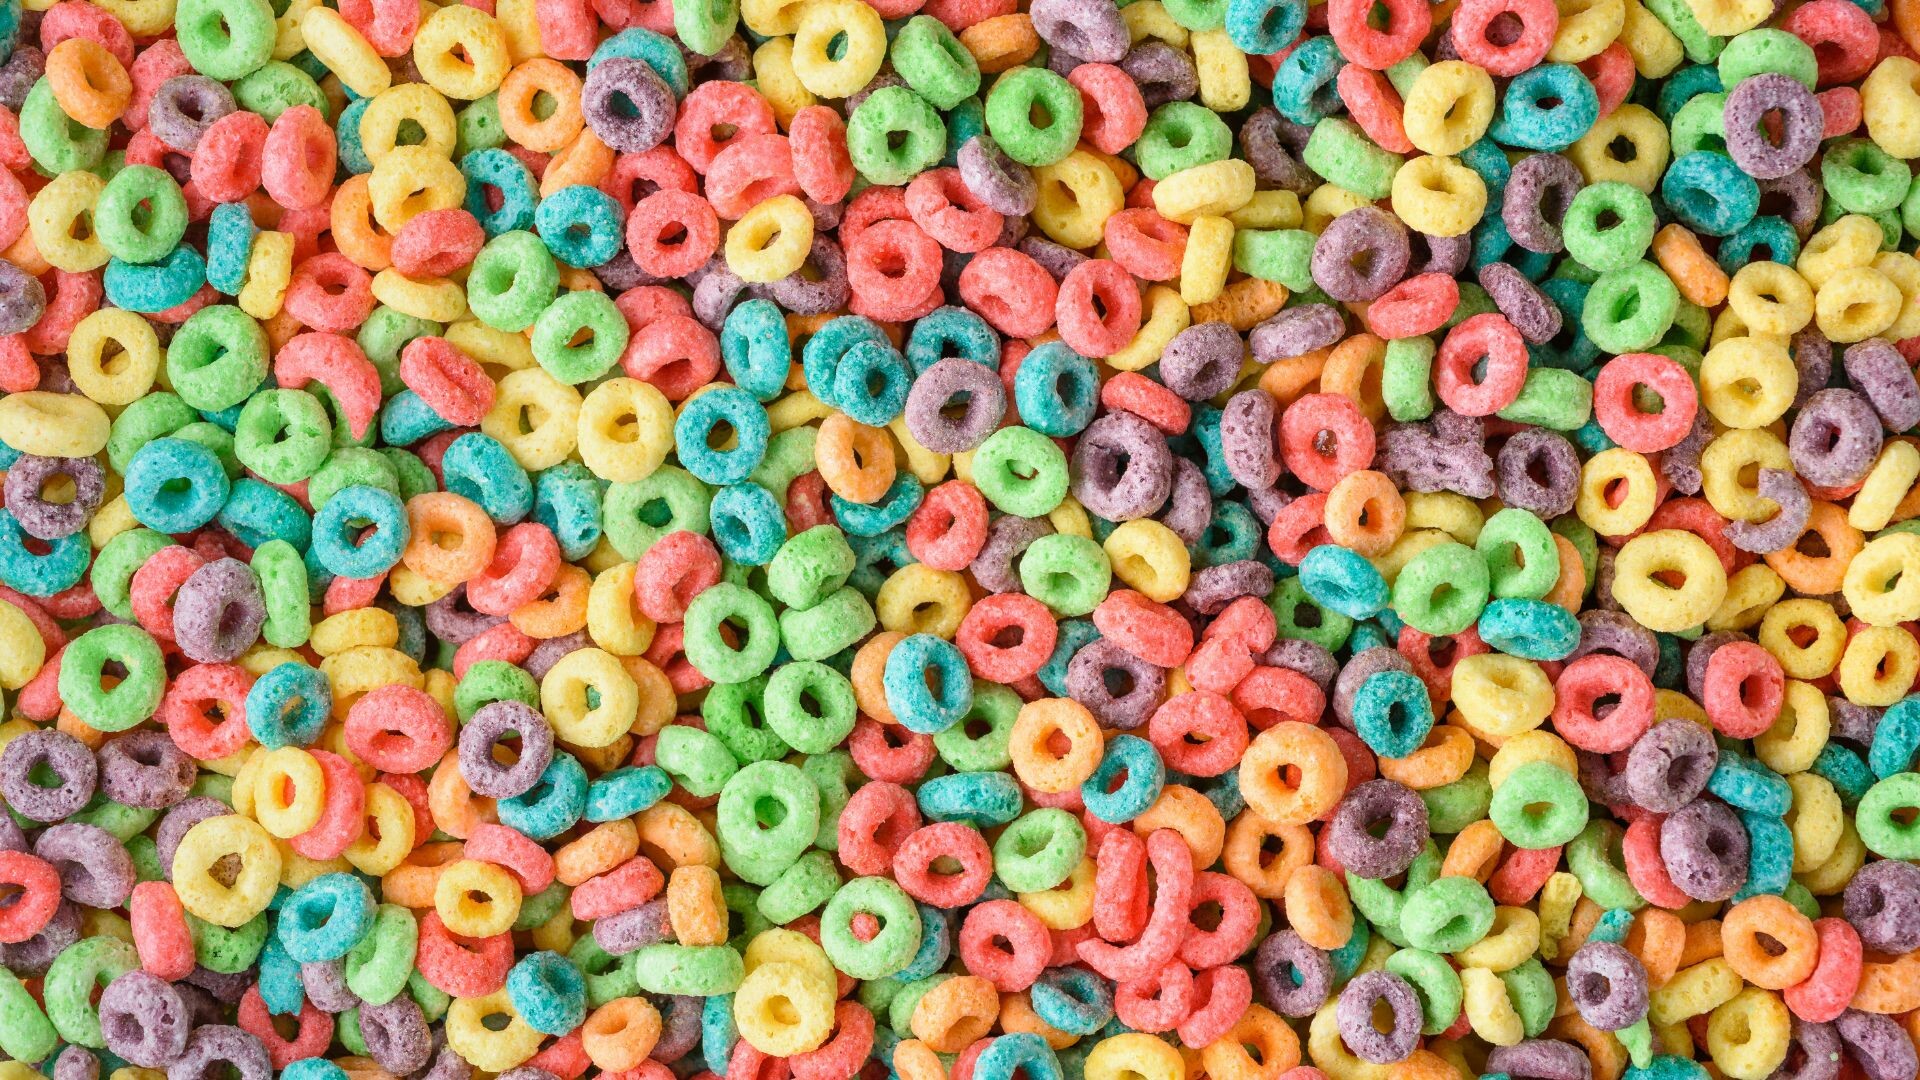 Lots of colourful cereal.